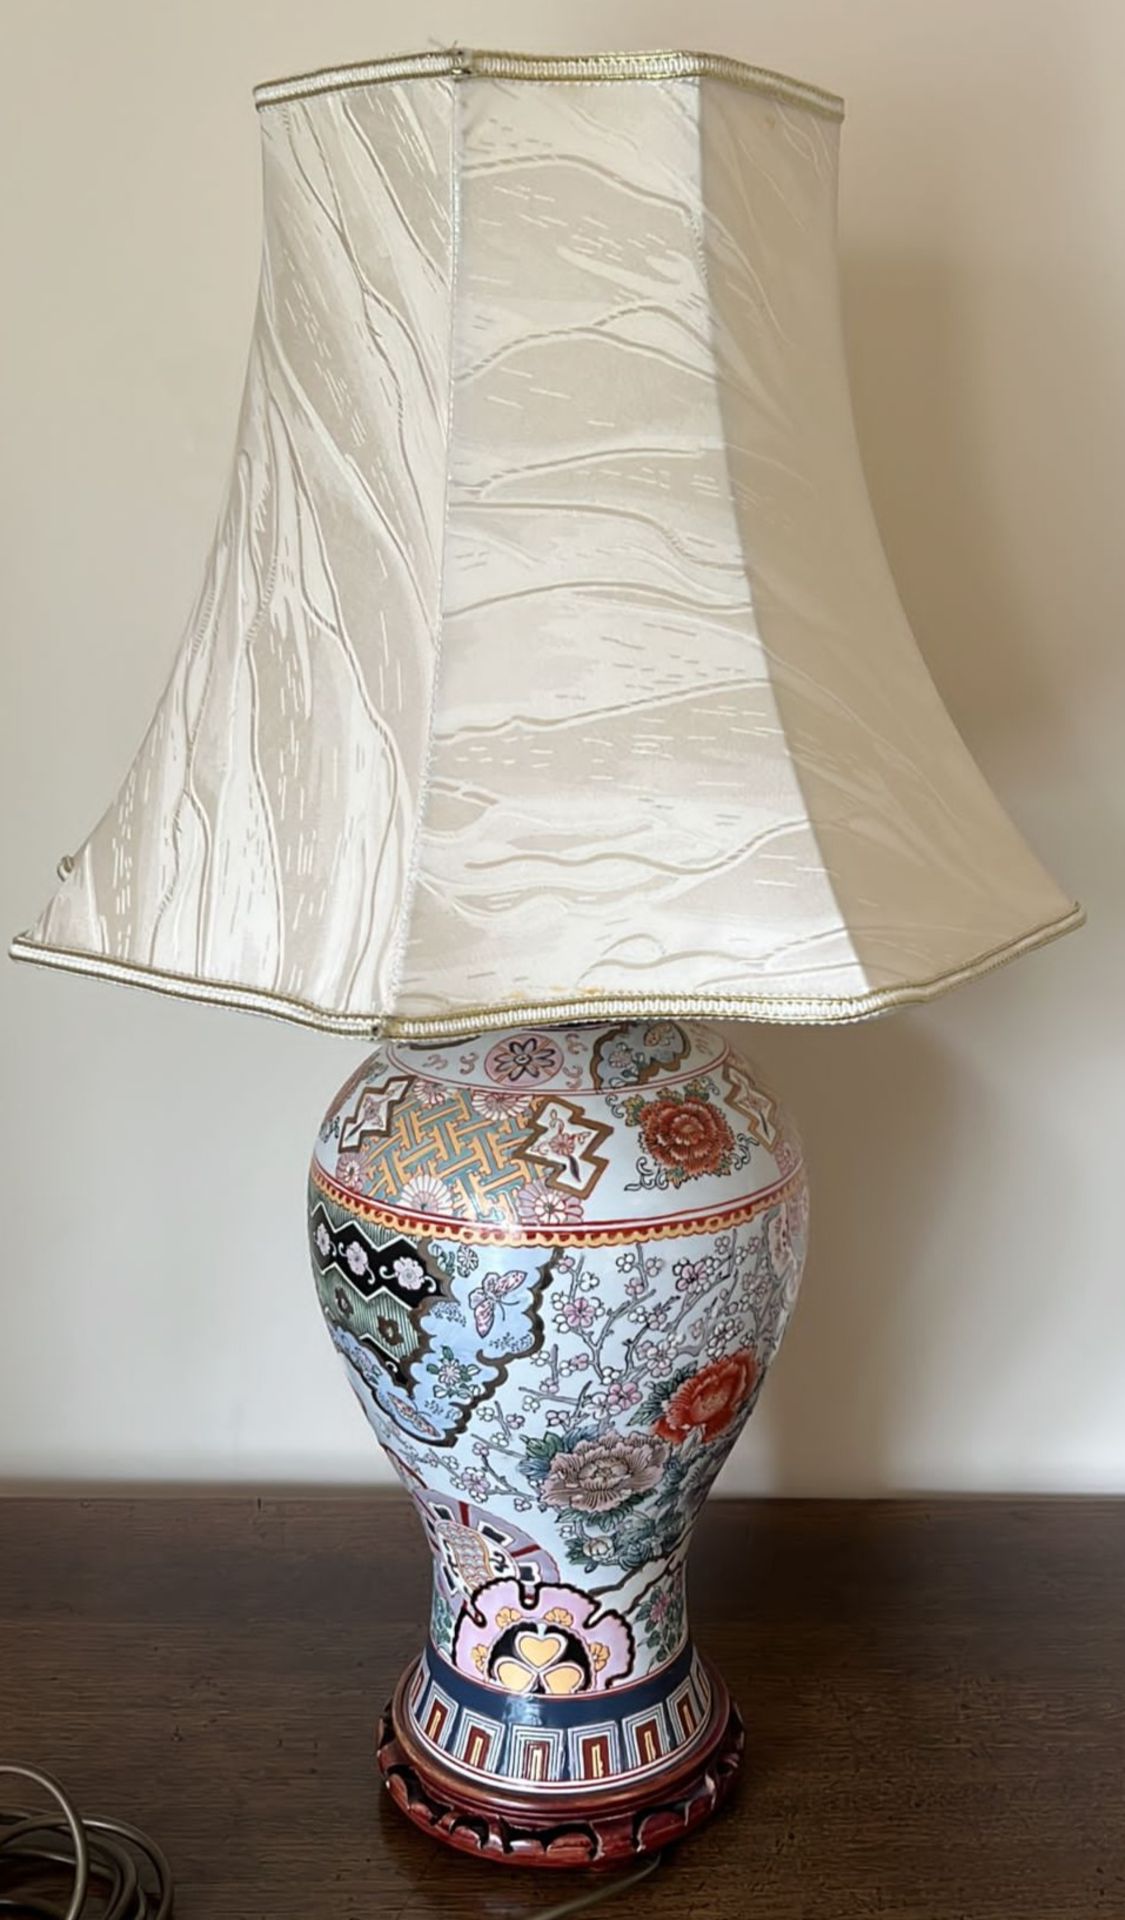 A CHINESE ENAMEL DESIGN TABLE LAMP WITH GEOMETRIC AND FLORAL DESIGNS, ON CARVED WOODEN BASE AND